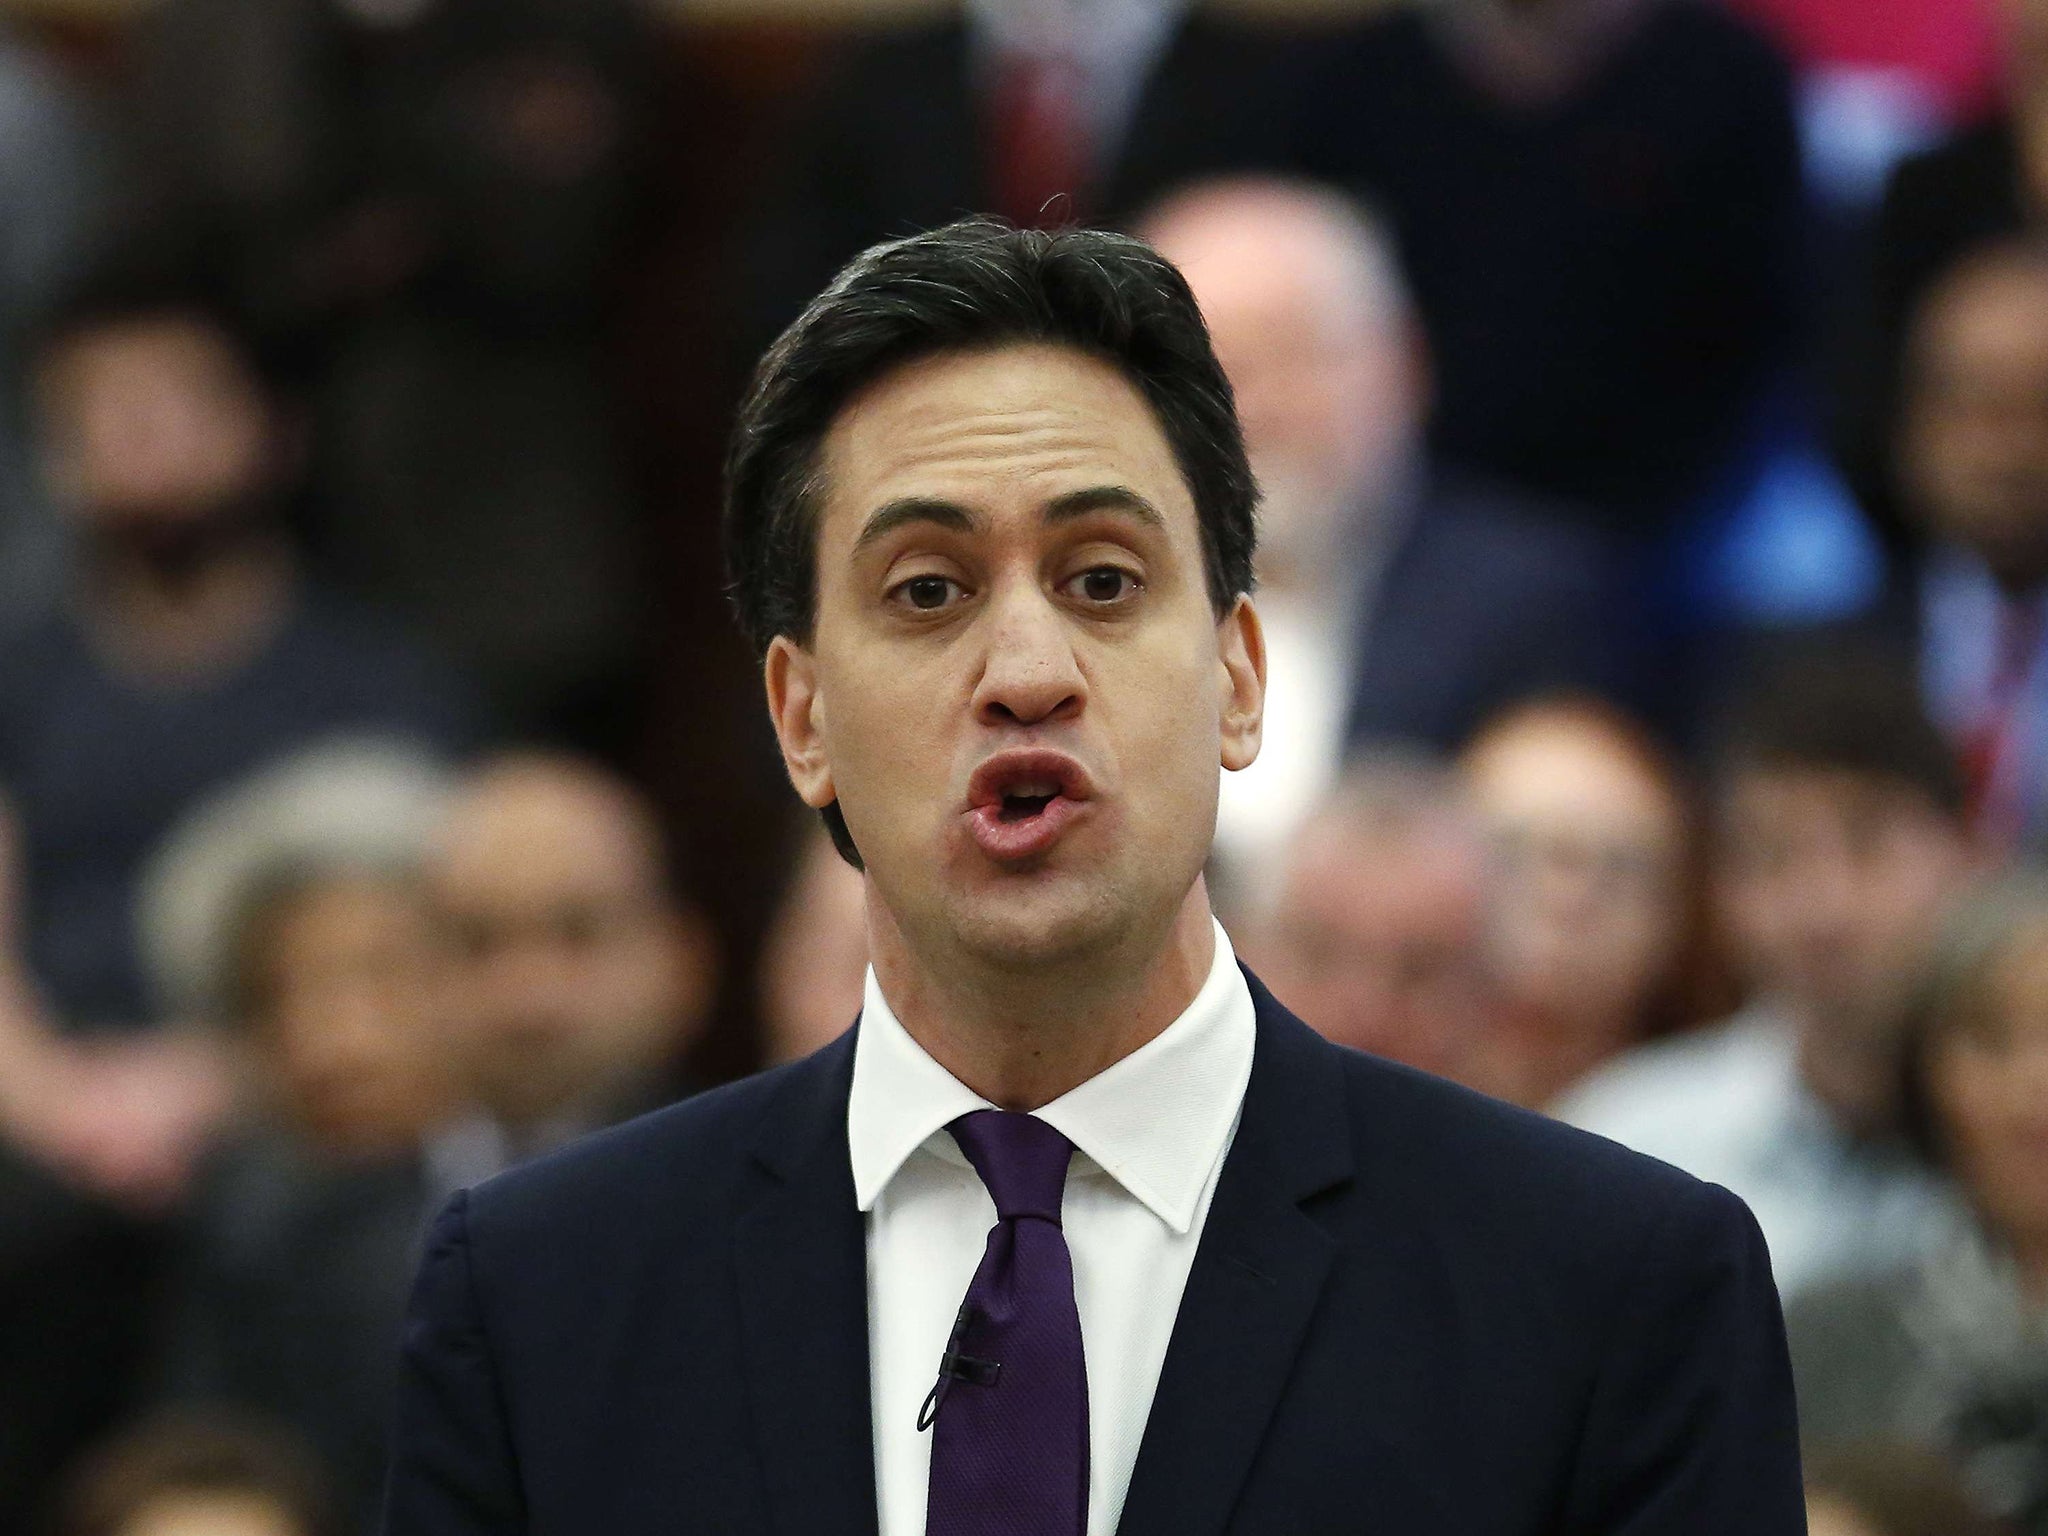 Ed Miliband compared workers struggling on zero-hours contracts with people at the top who paid “zero tax”